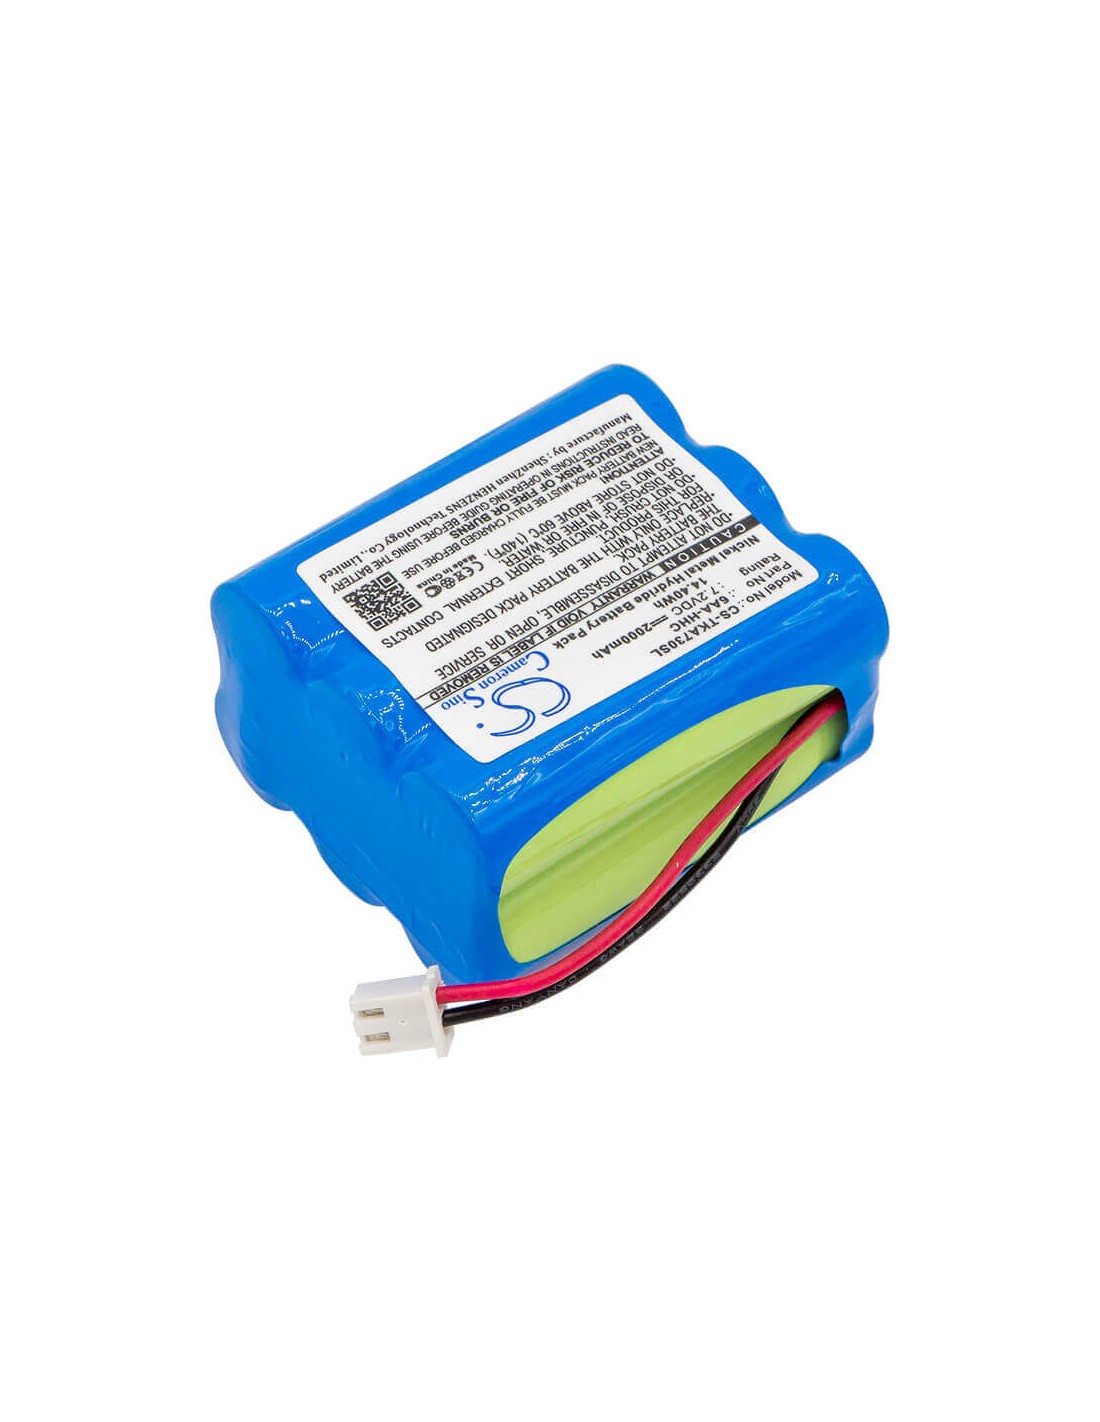 Battery for Tdk, Life On Record A73, Life On Record A73 Boombox 7.2V, 2000mAh - 14.40Wh